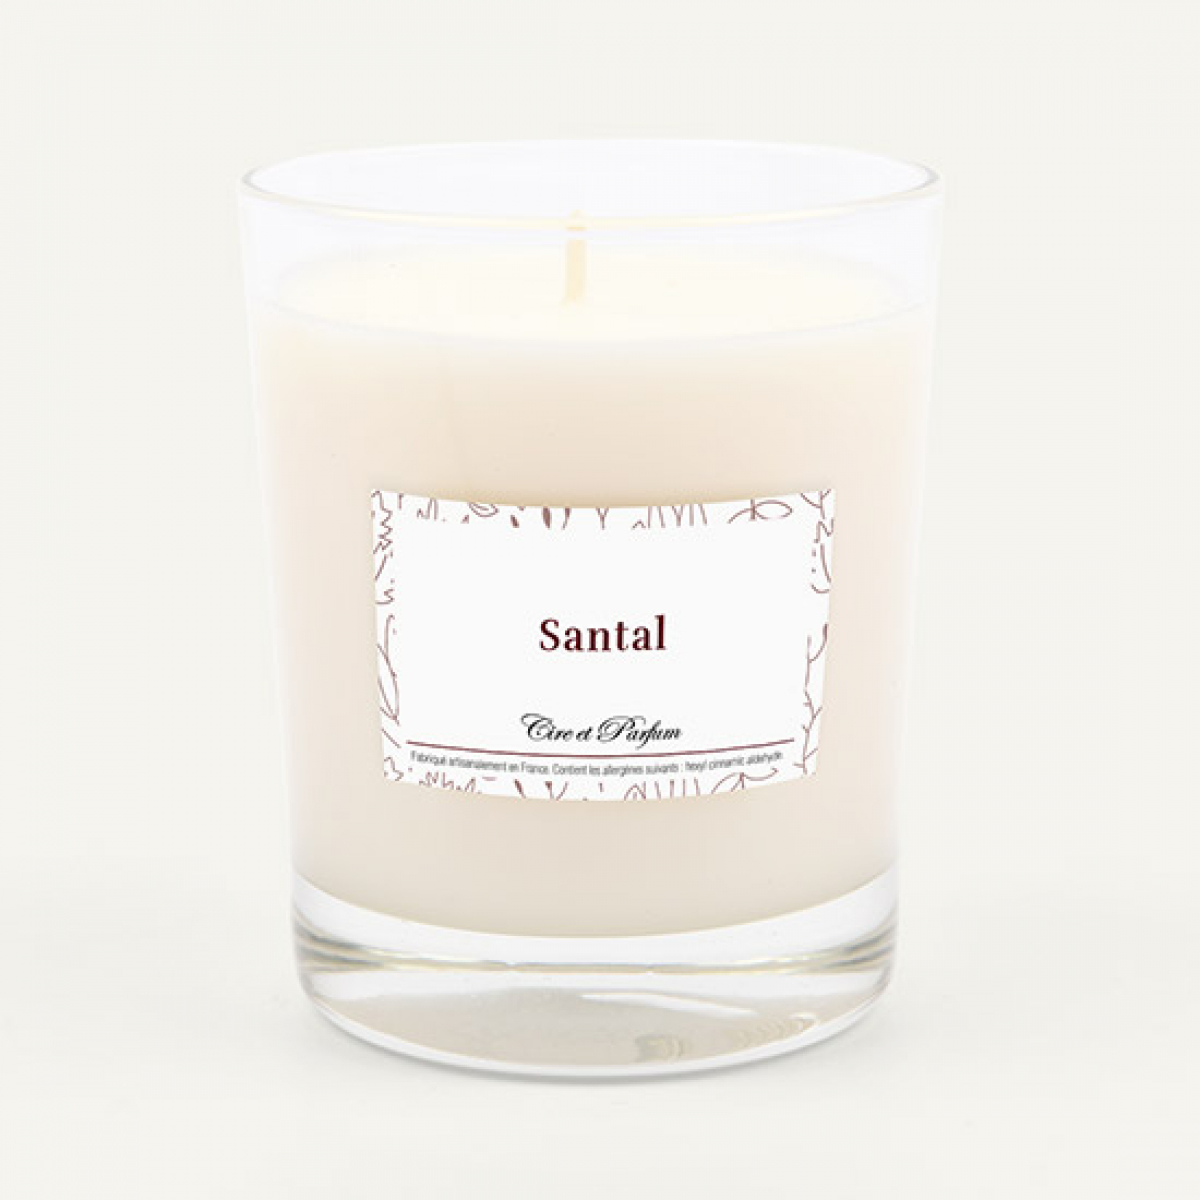 Dream night scented candle